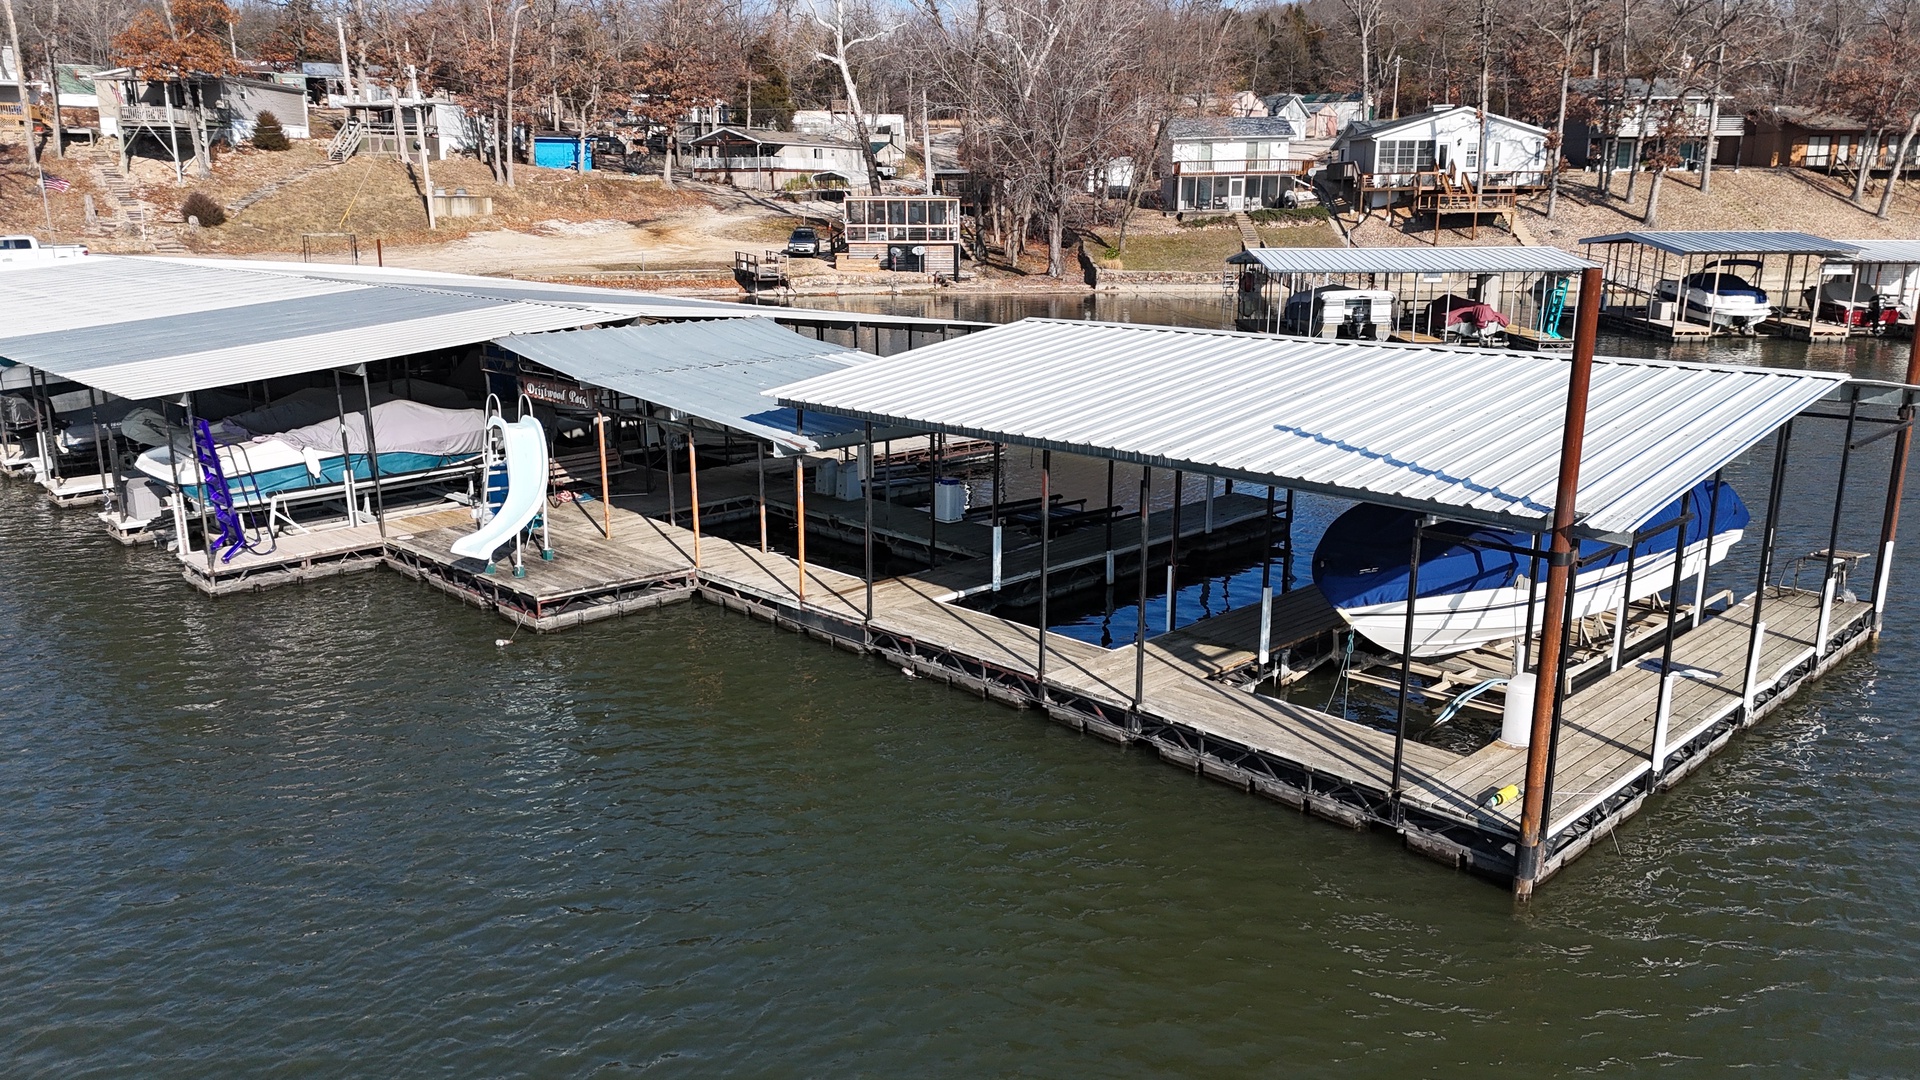 Mariners rejoice! A 10x29 boat slip is included!